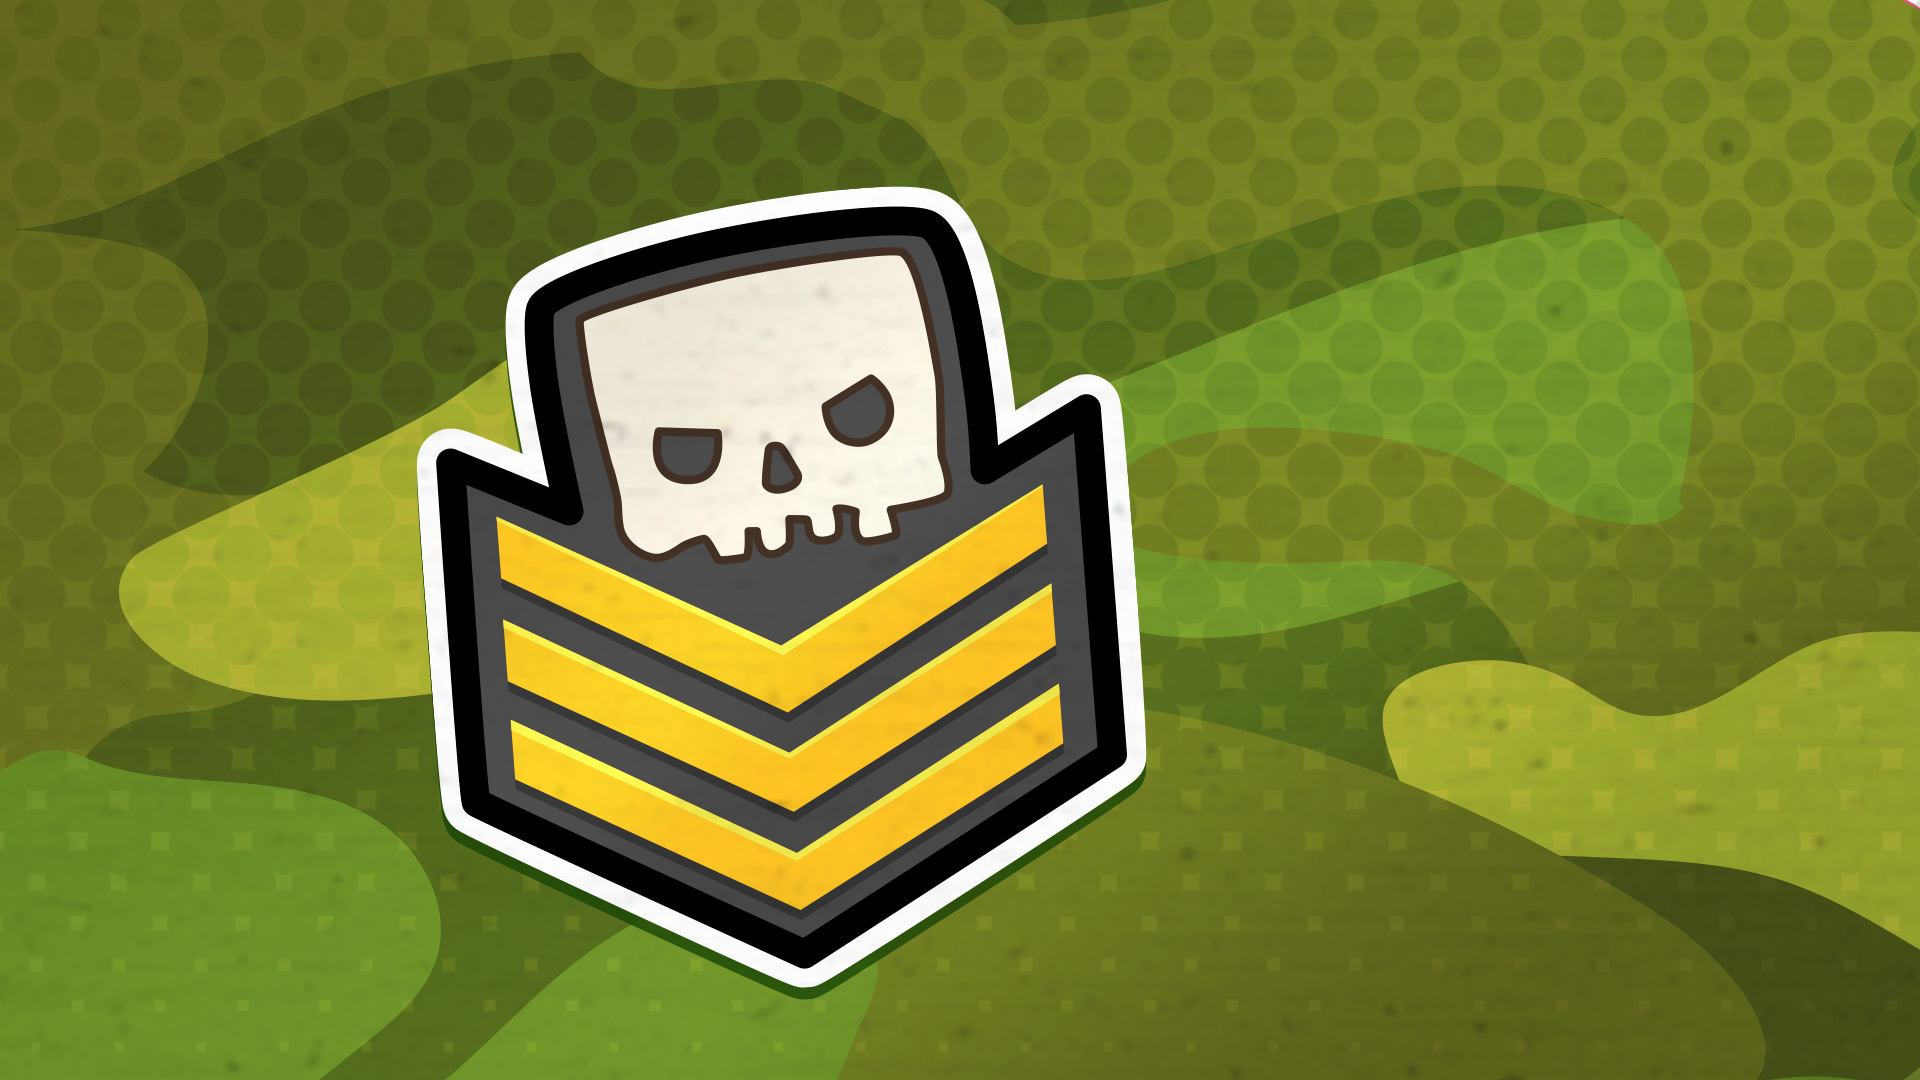 Icon for Sergeant